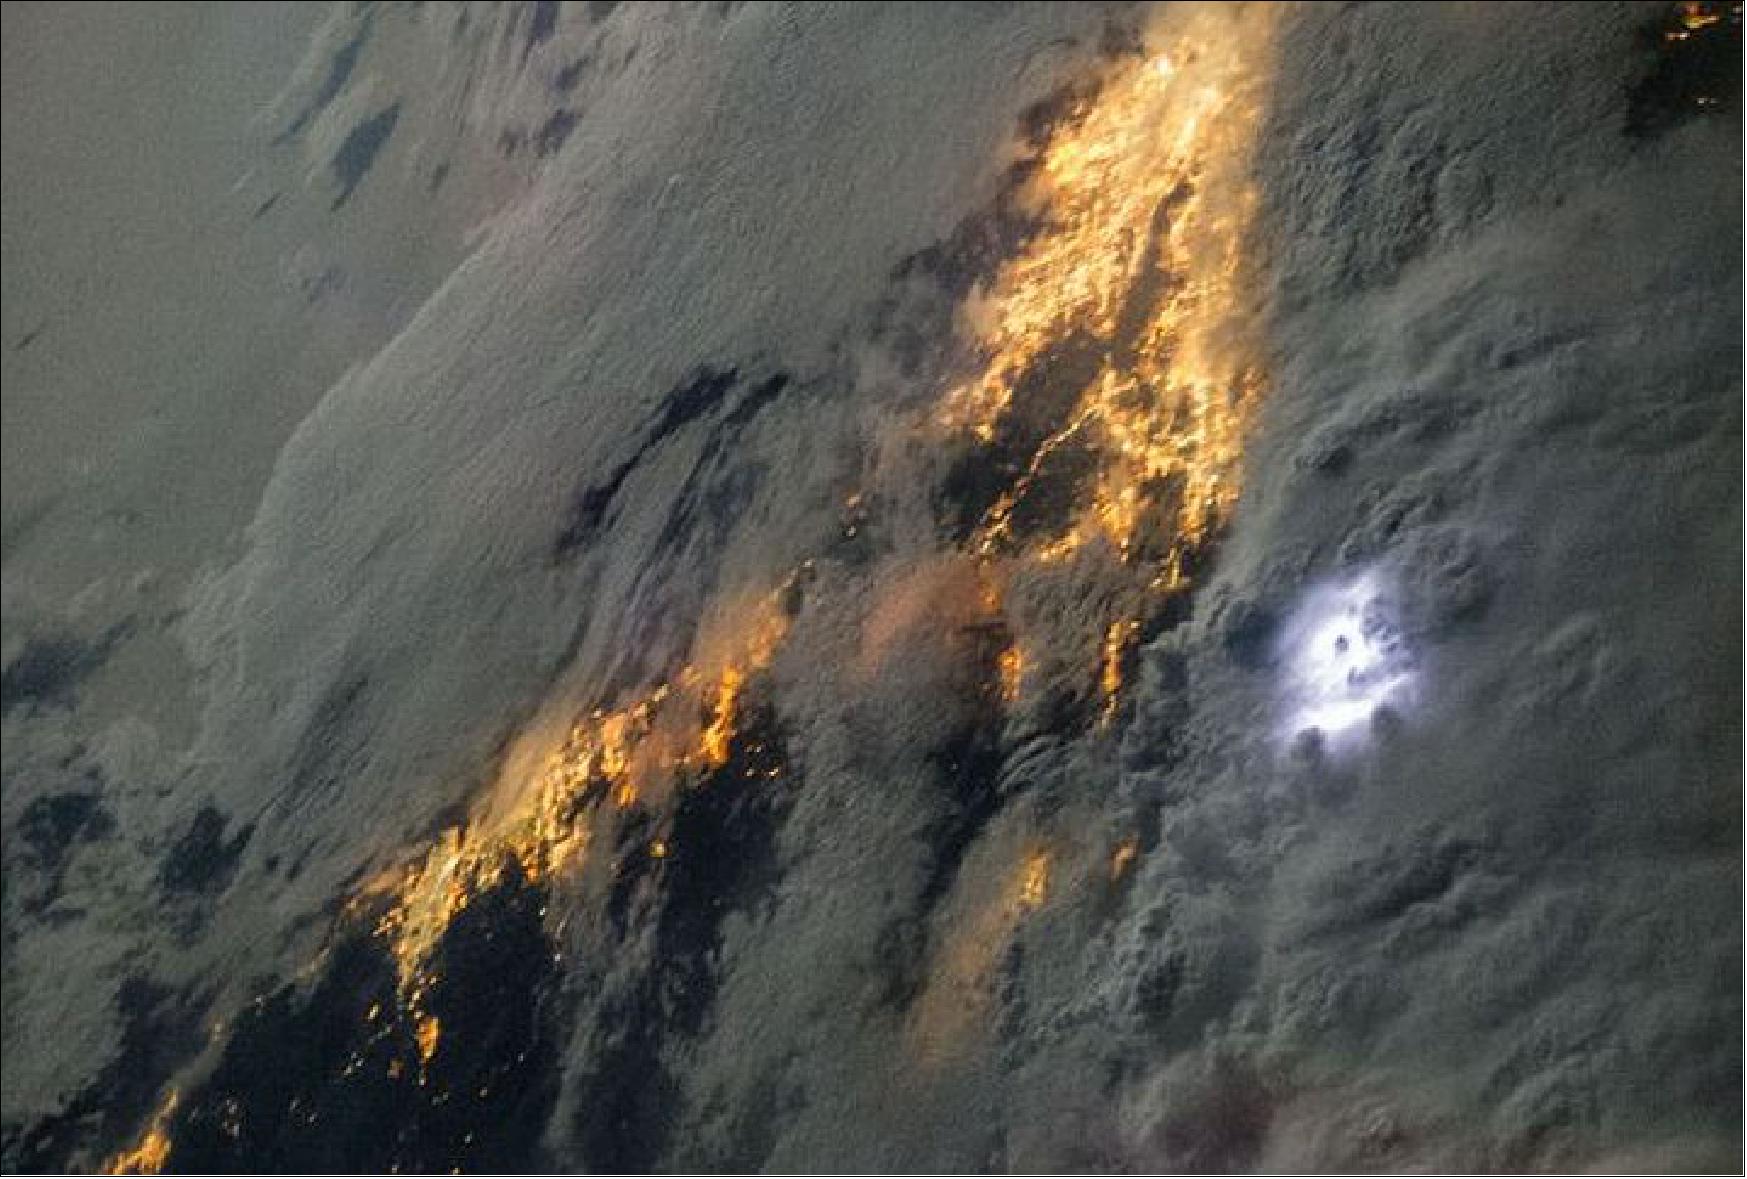 Figure 4: This ISS (International Space Station) crew Earth image of storm clouds over California shows lightning as a white glow to the right of center. The yellow lit areas beneath the clouds are the night lights from the highly populated areas of Los Angeles and San Diego (image credit: NASA,ISS036-E-022863, 21 July 2013) 4)